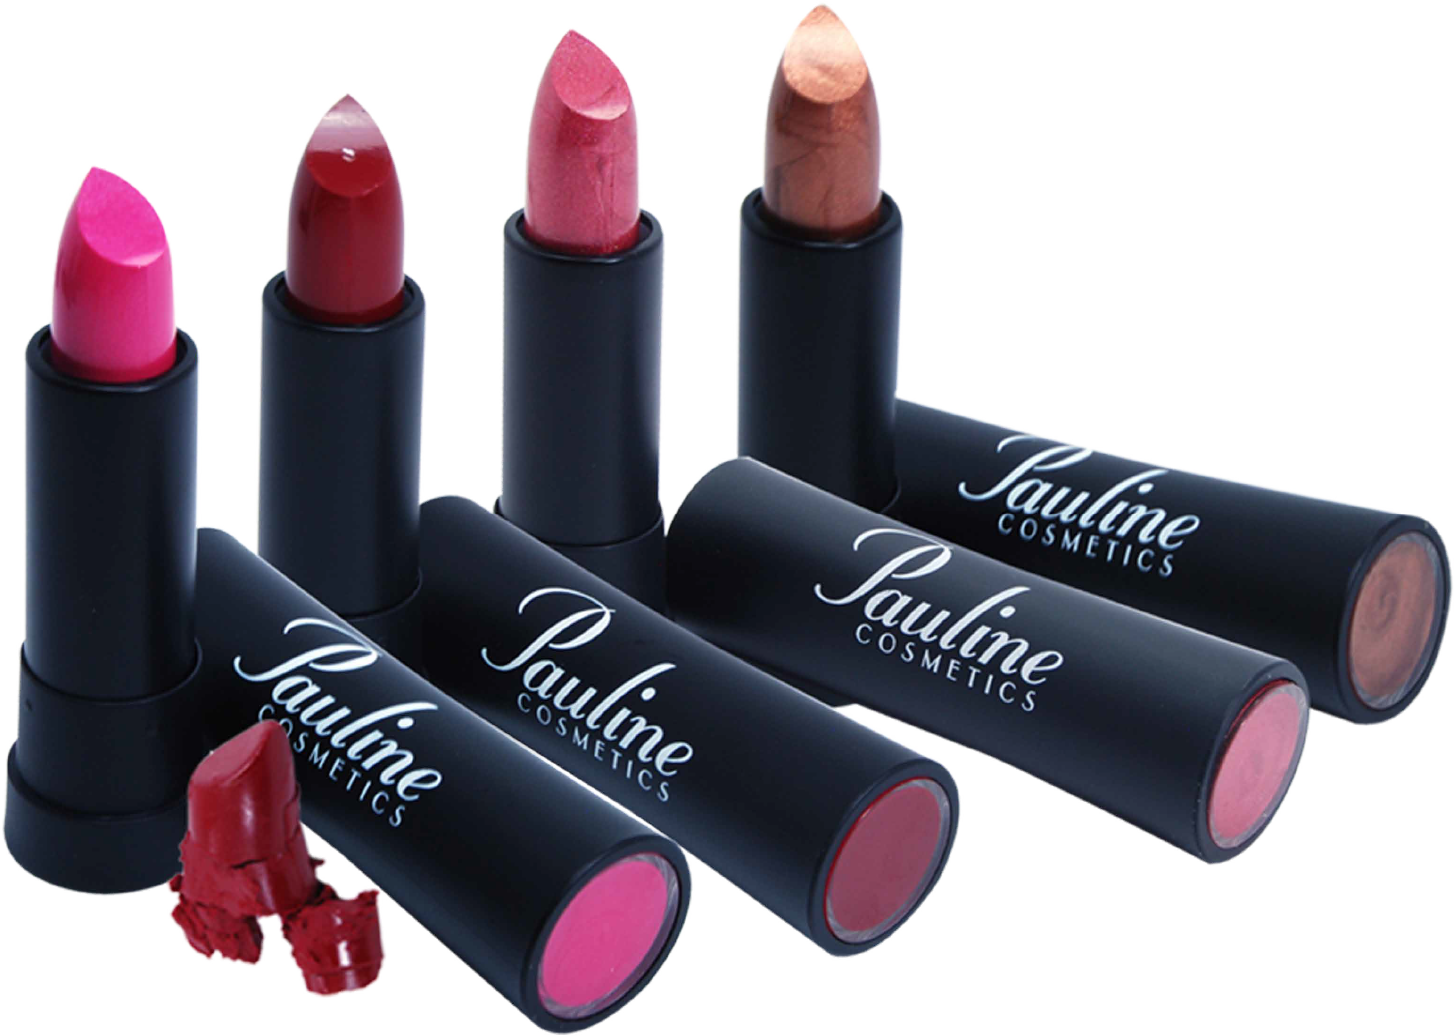 Lipstick PNG images free download